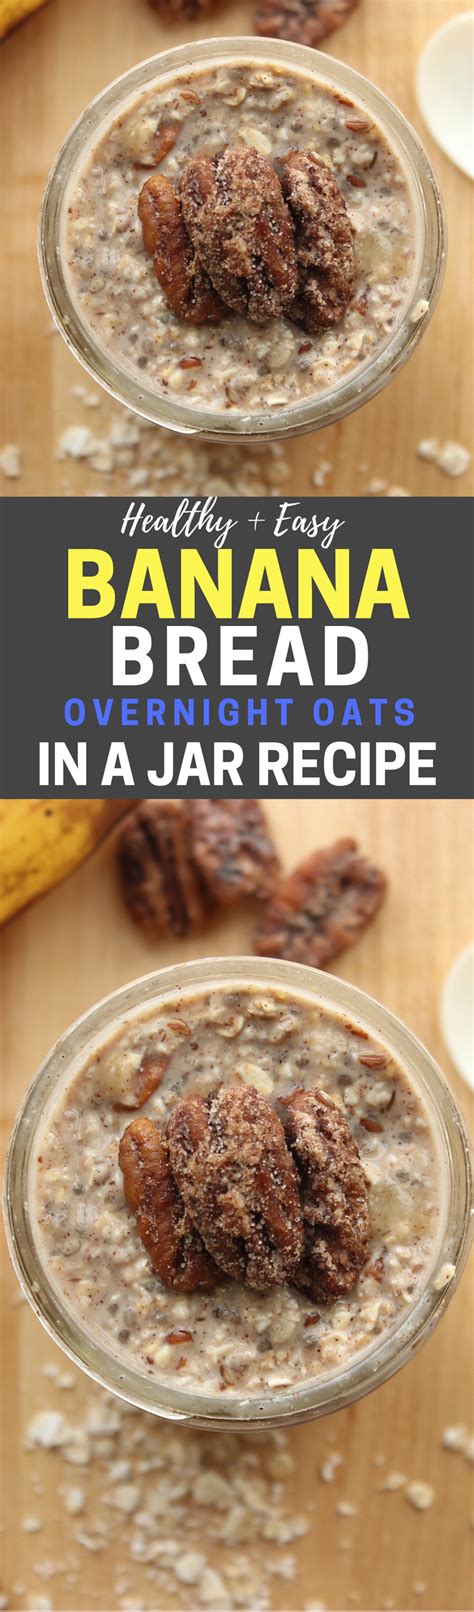 Banana Bread Overnight Oats The Diet Chef Recipe Meals In A Jar